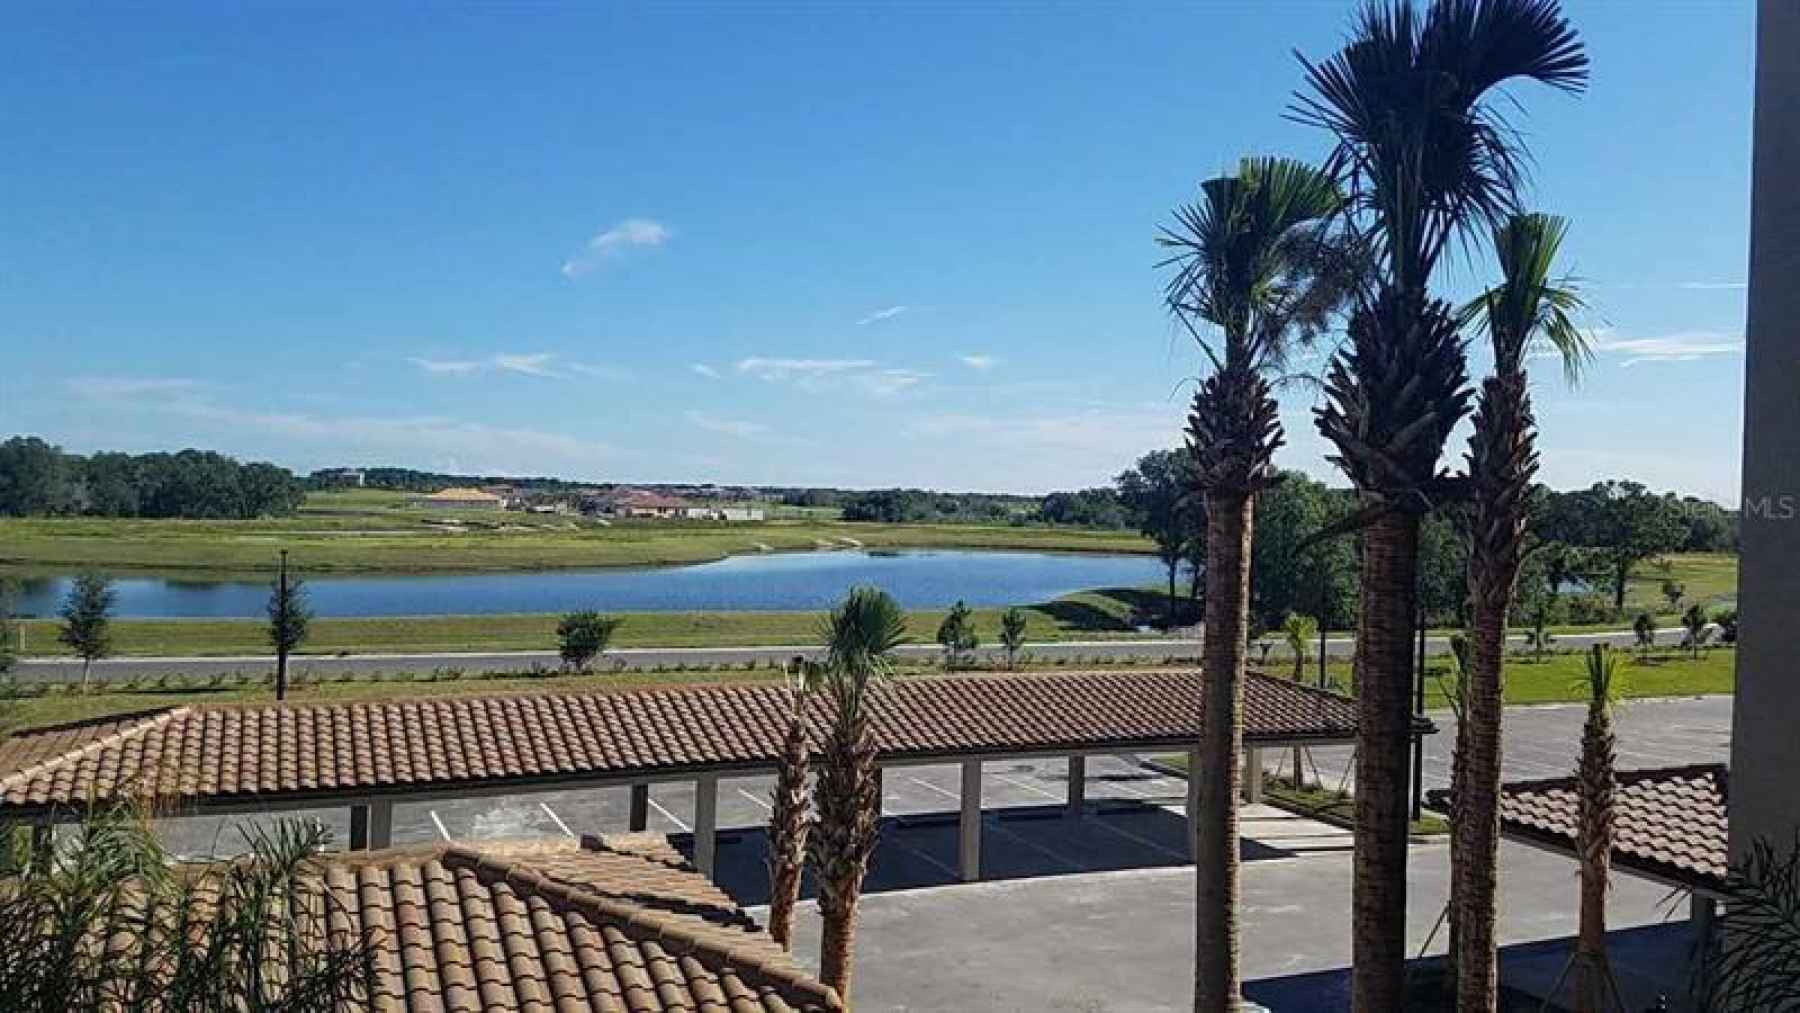 Golf Course and Lake From Condo